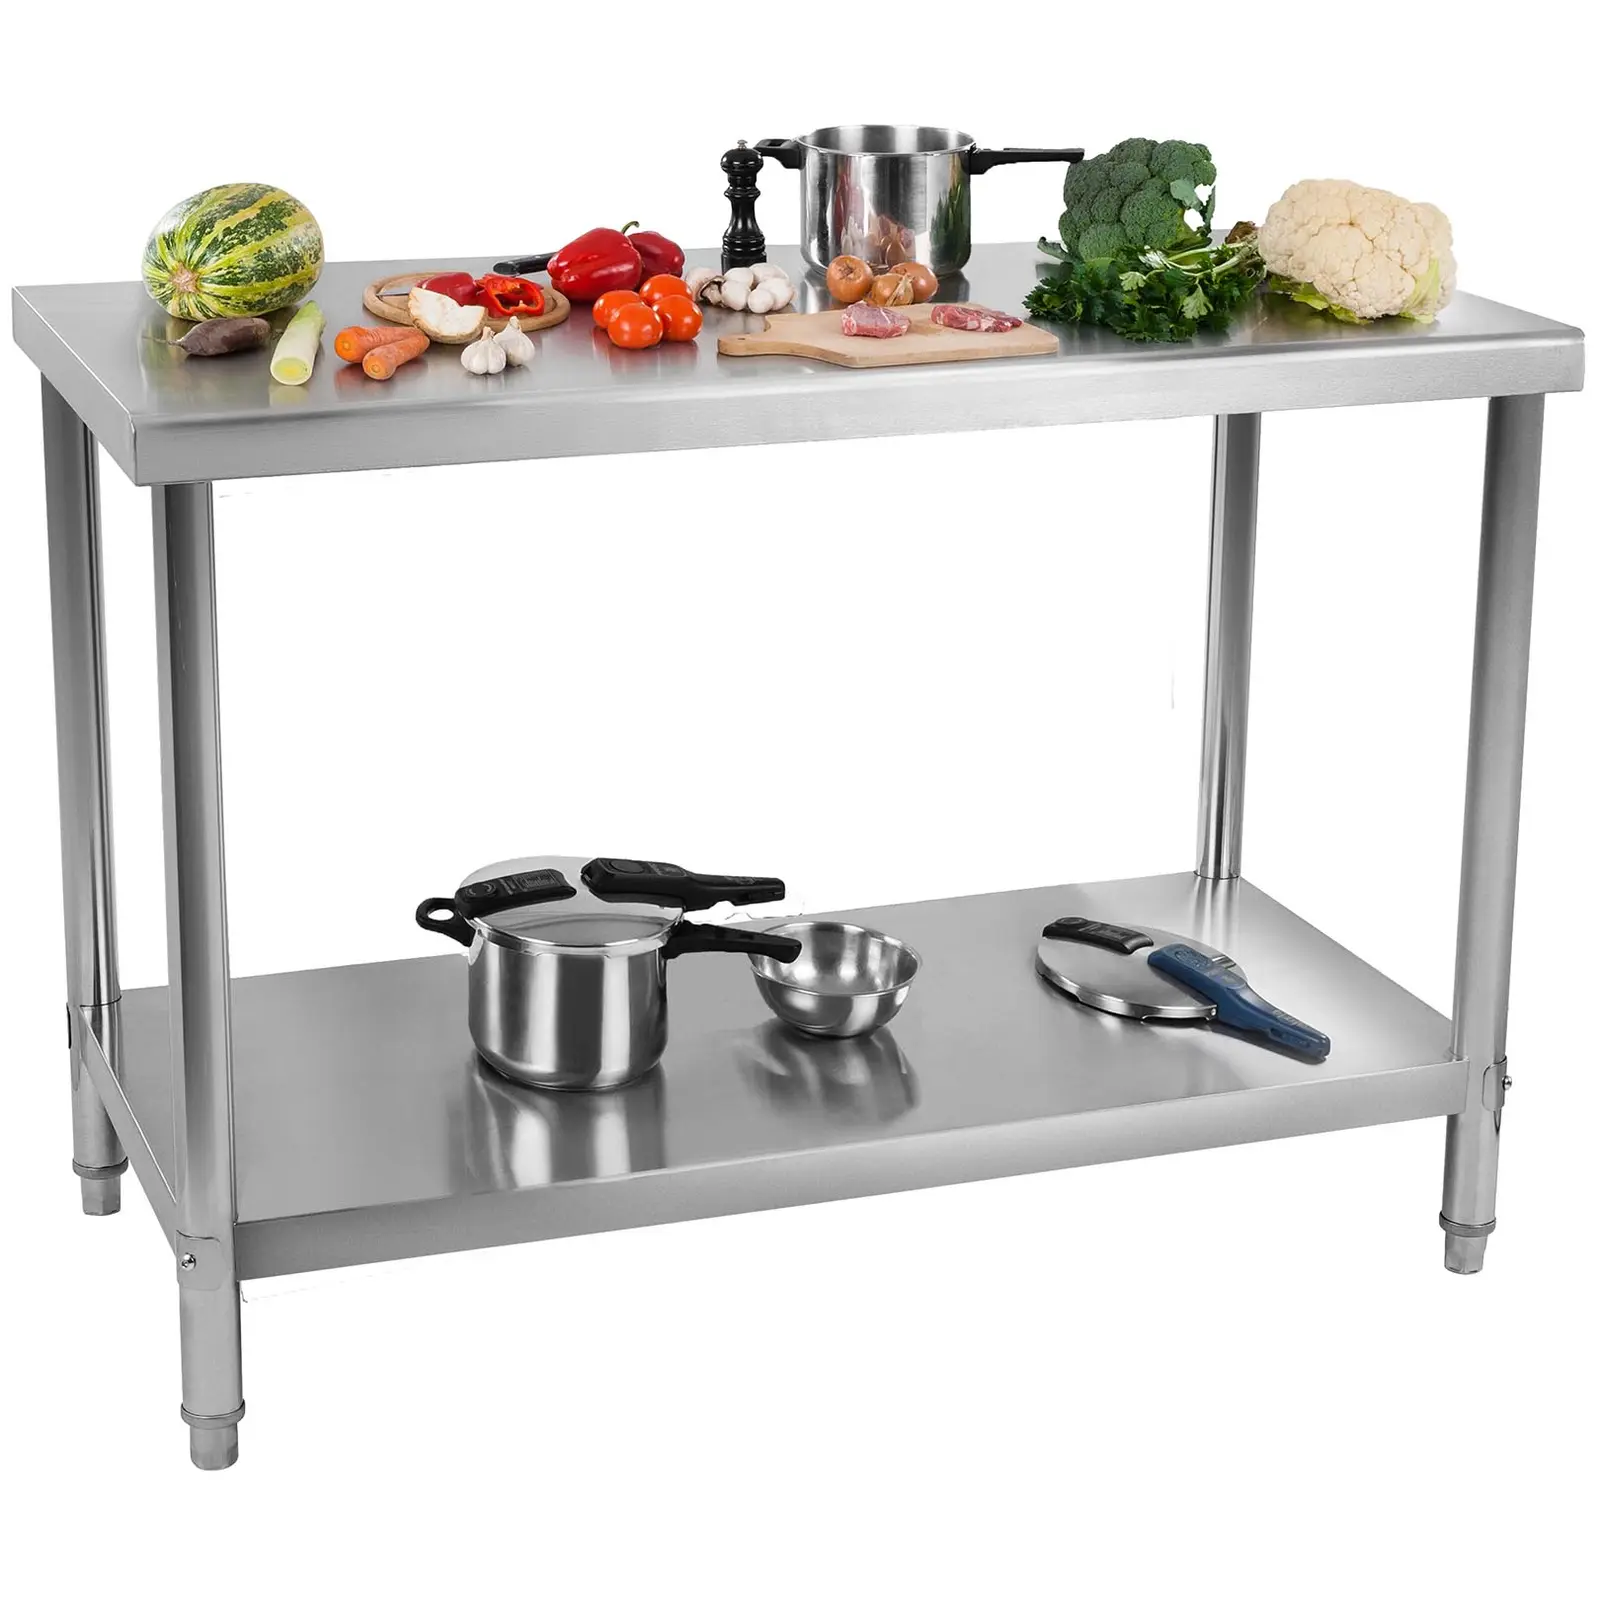 Stainless Steel Table - 120 x 70 cm - 143 kg loading capacity 